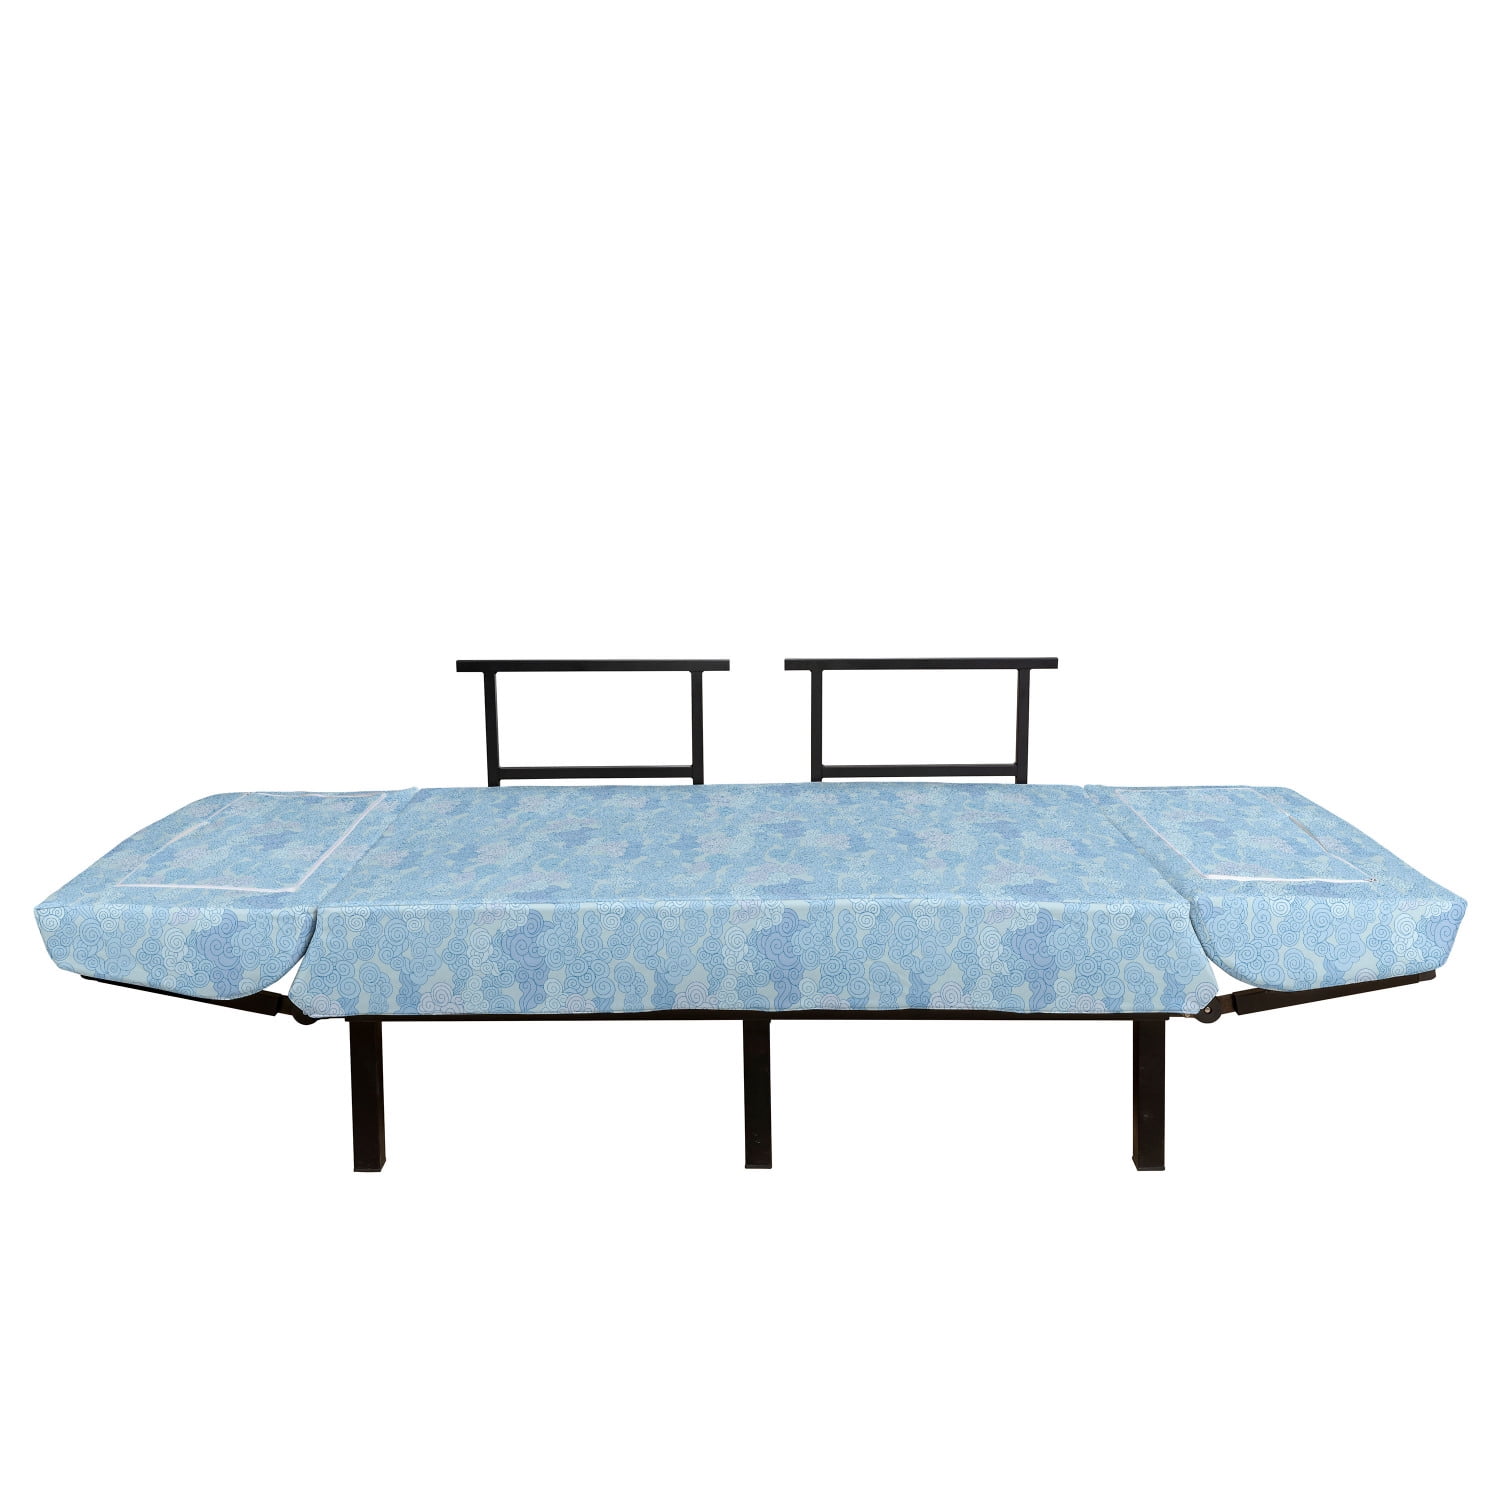 Vintage Blue Futon Couch, Cloudy Sky Pattern in Chinese Style with Swirls and Spirals Daybed Metal Frame Upholstered Sofa for Loveseat, Pale Blue, by Ambesonne - Walmart.com